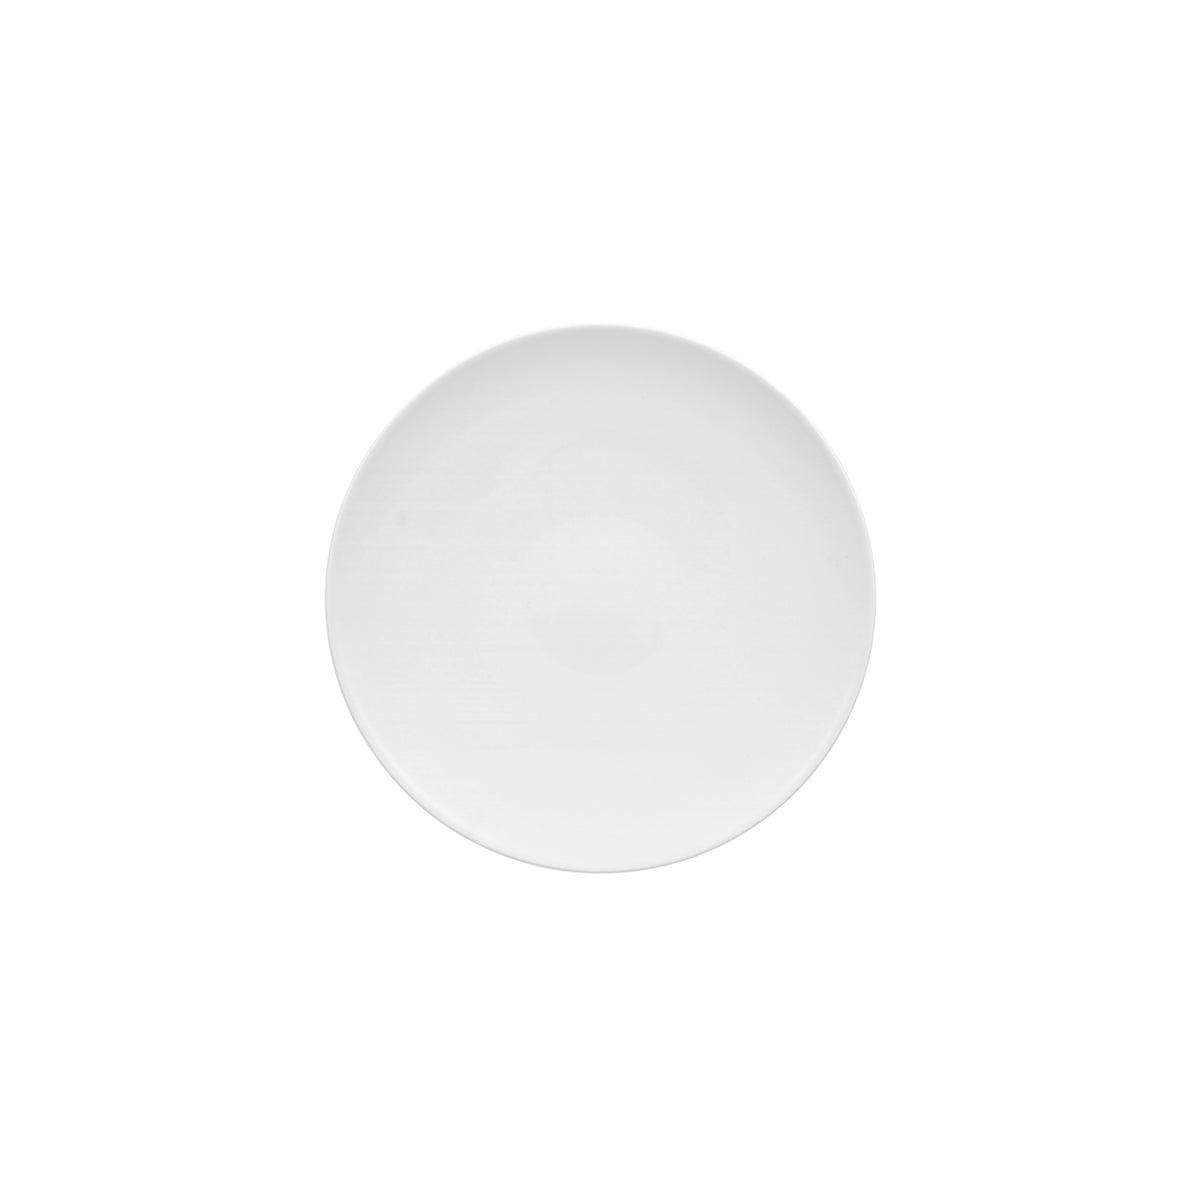 VB16-3272-2601 Villeroy And Boch Villeroy And Boch Stella Hotel White Coupe Plate 290mm Tomkin Australia Hospitality Supplies